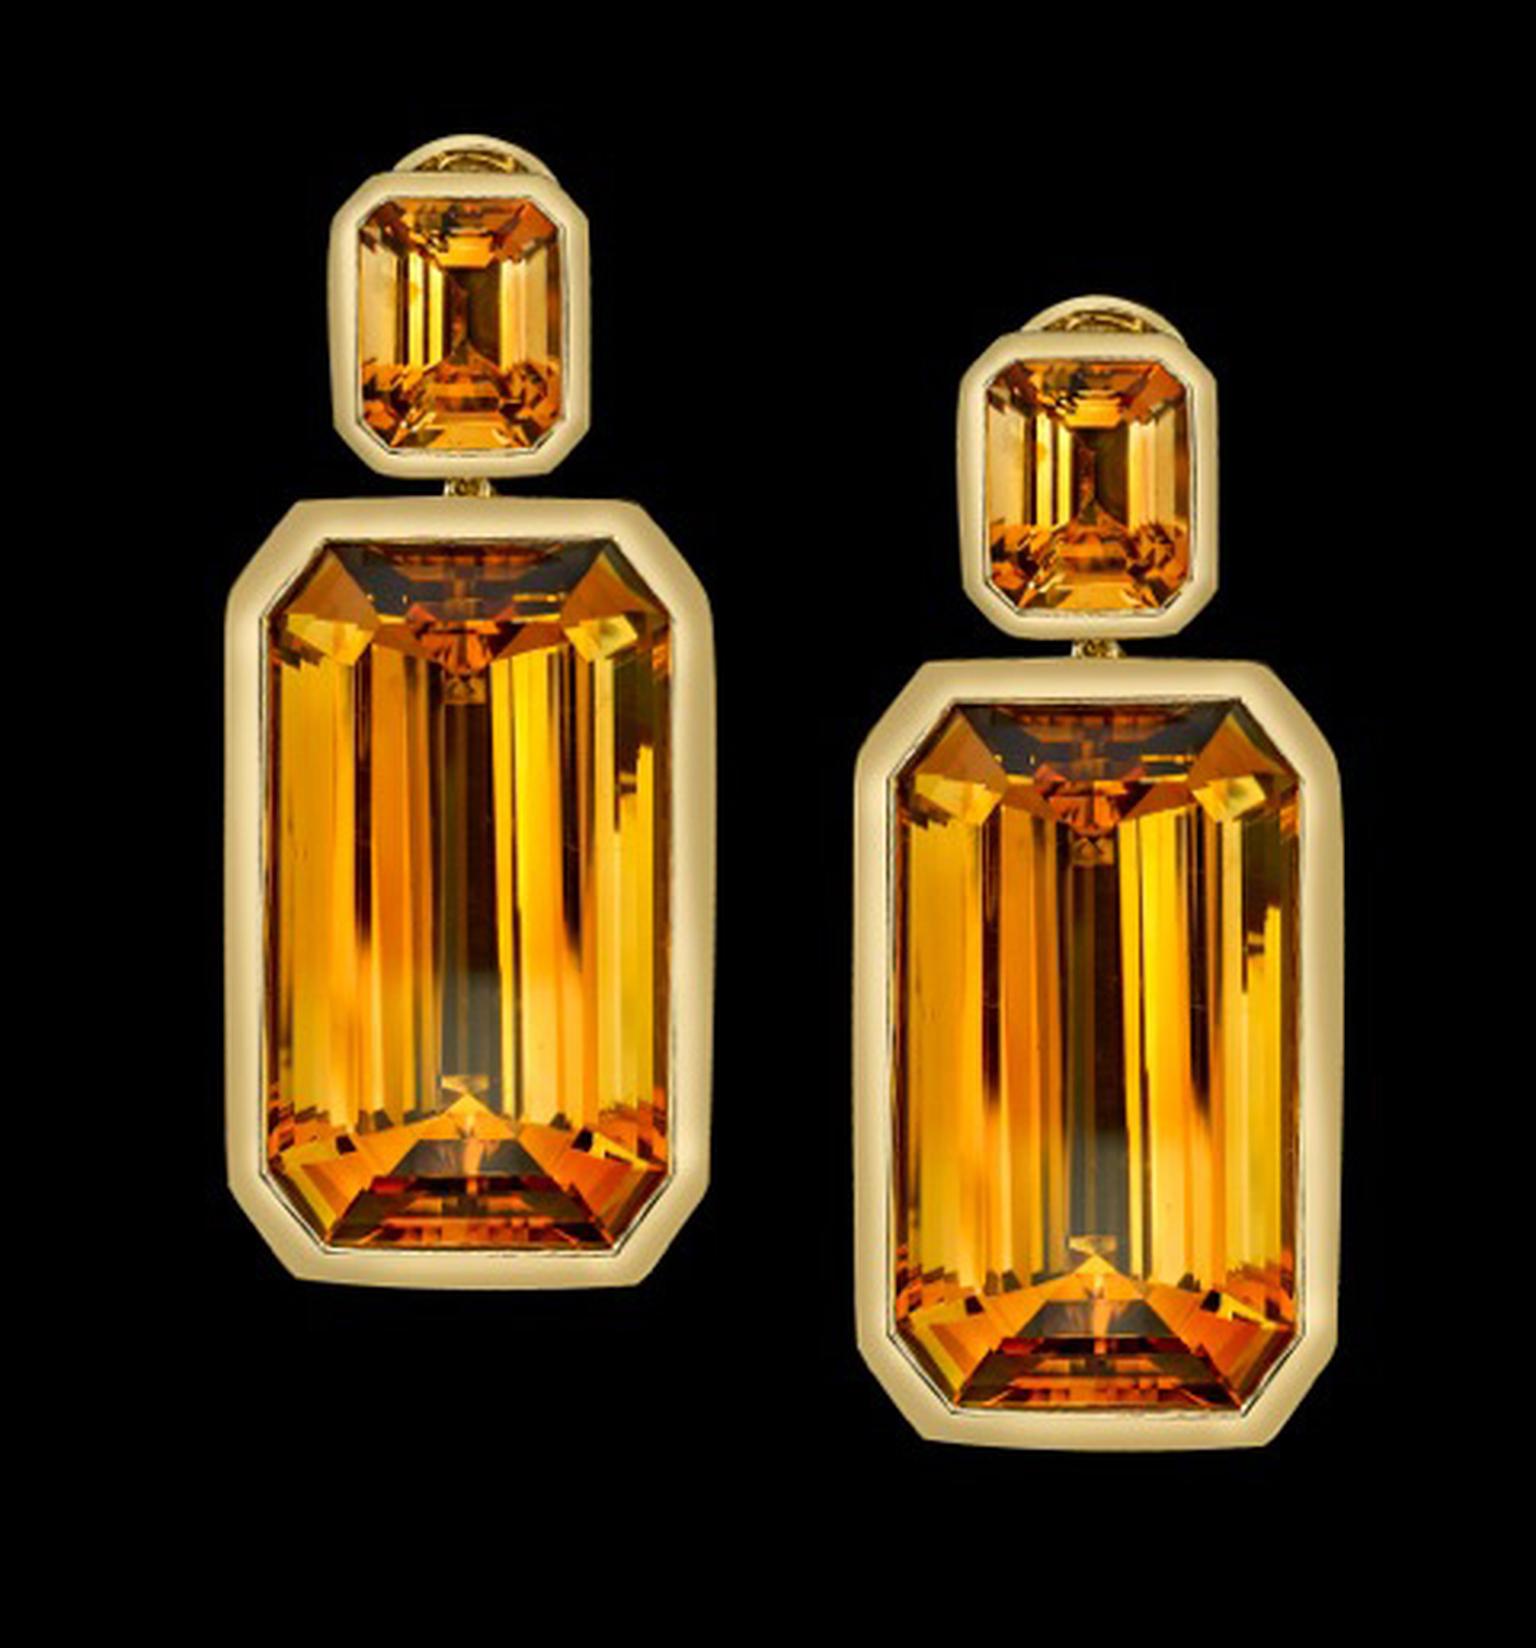 Natural citrine is named after its unusual yellow colour and the rarest of the quartz varieties